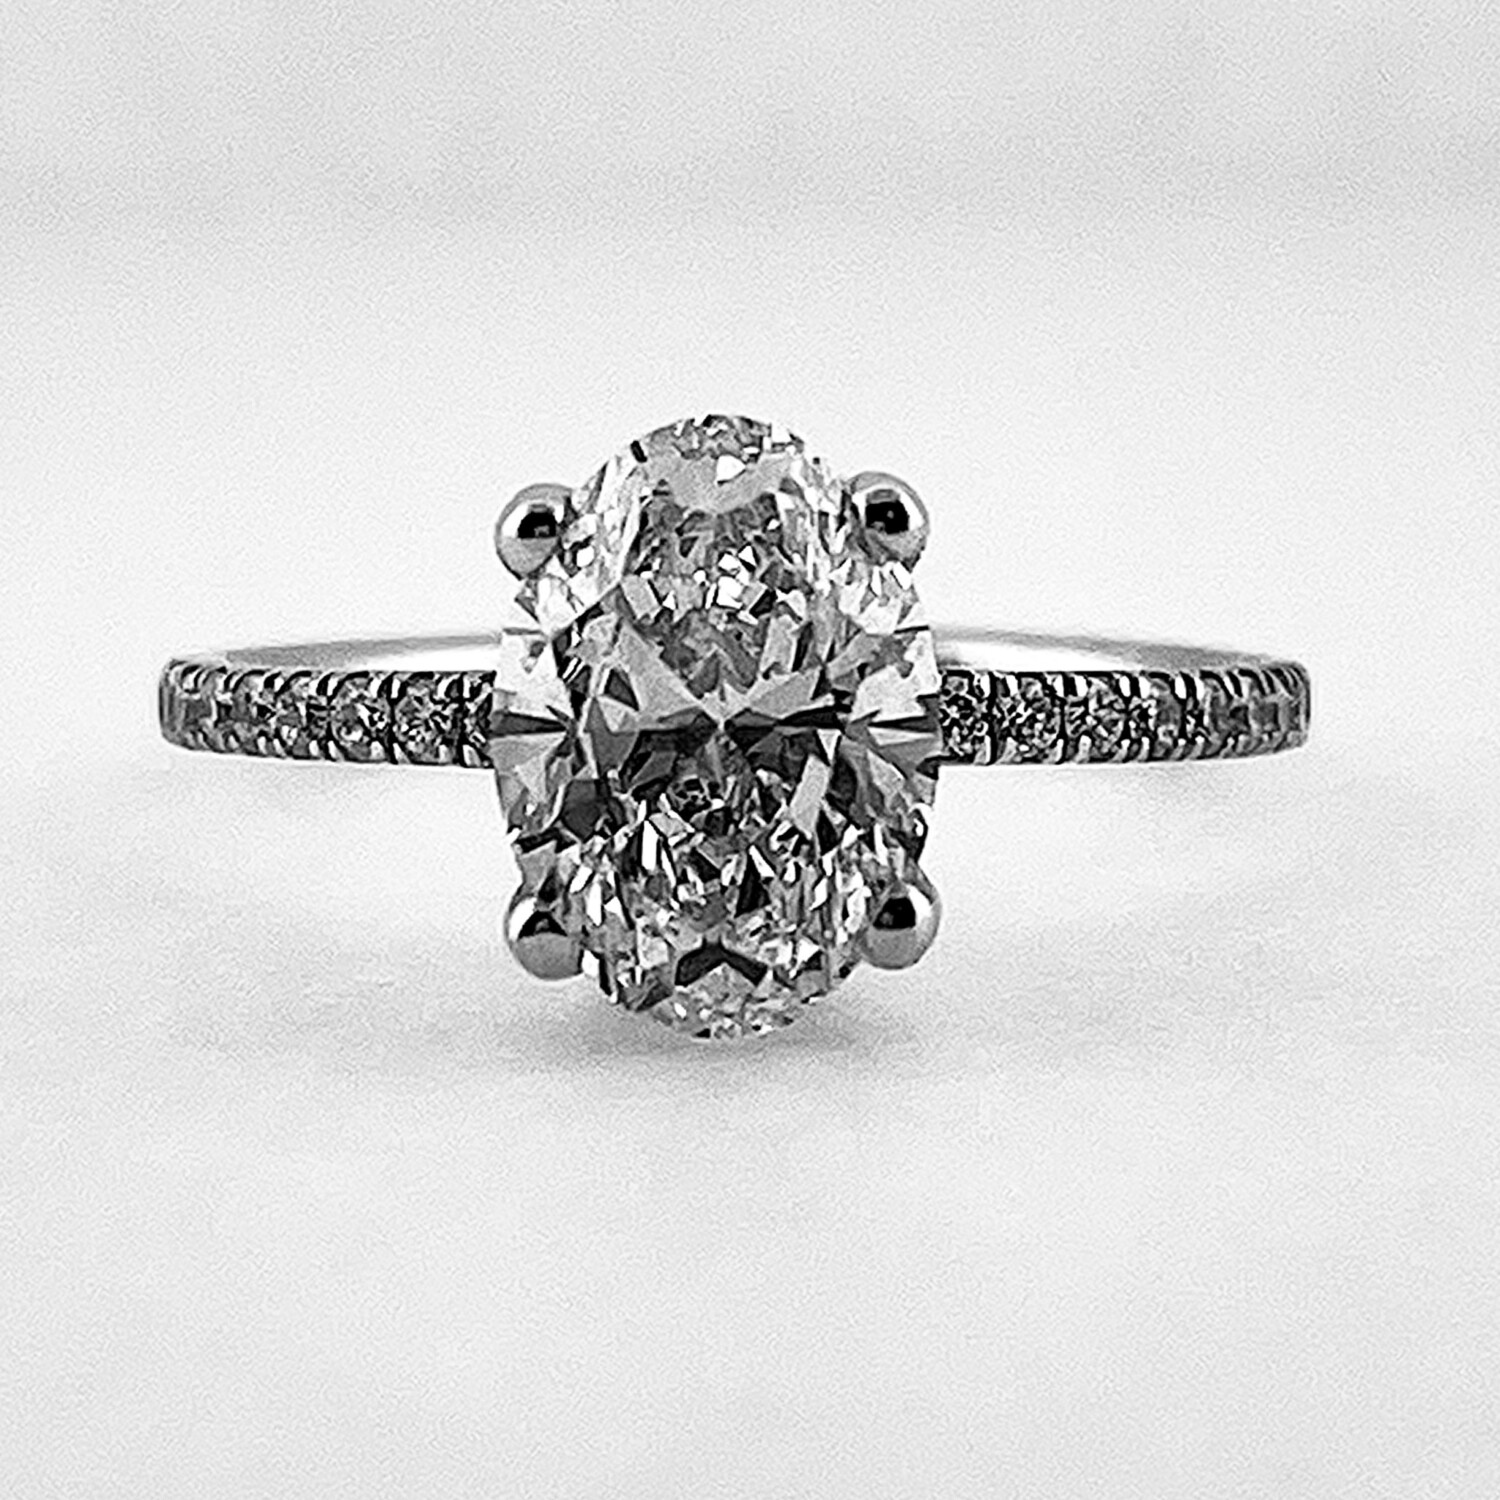 Oval Cut Engagement Ring